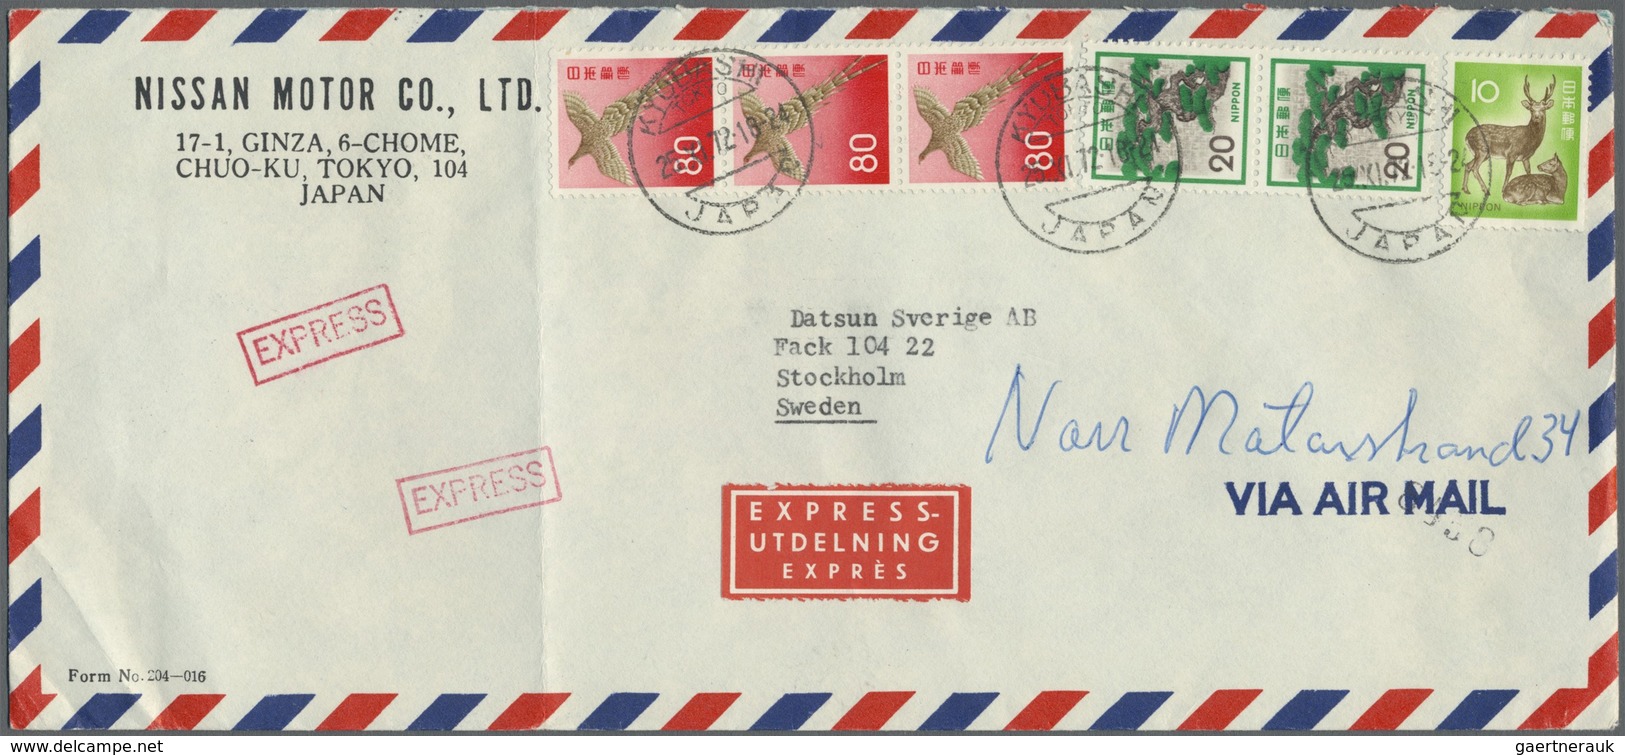 Br/GA/ Japan: 1950/90 (ca.), about 200 covers/used ppc/few used stationery, all gone to abroad, inc. regist